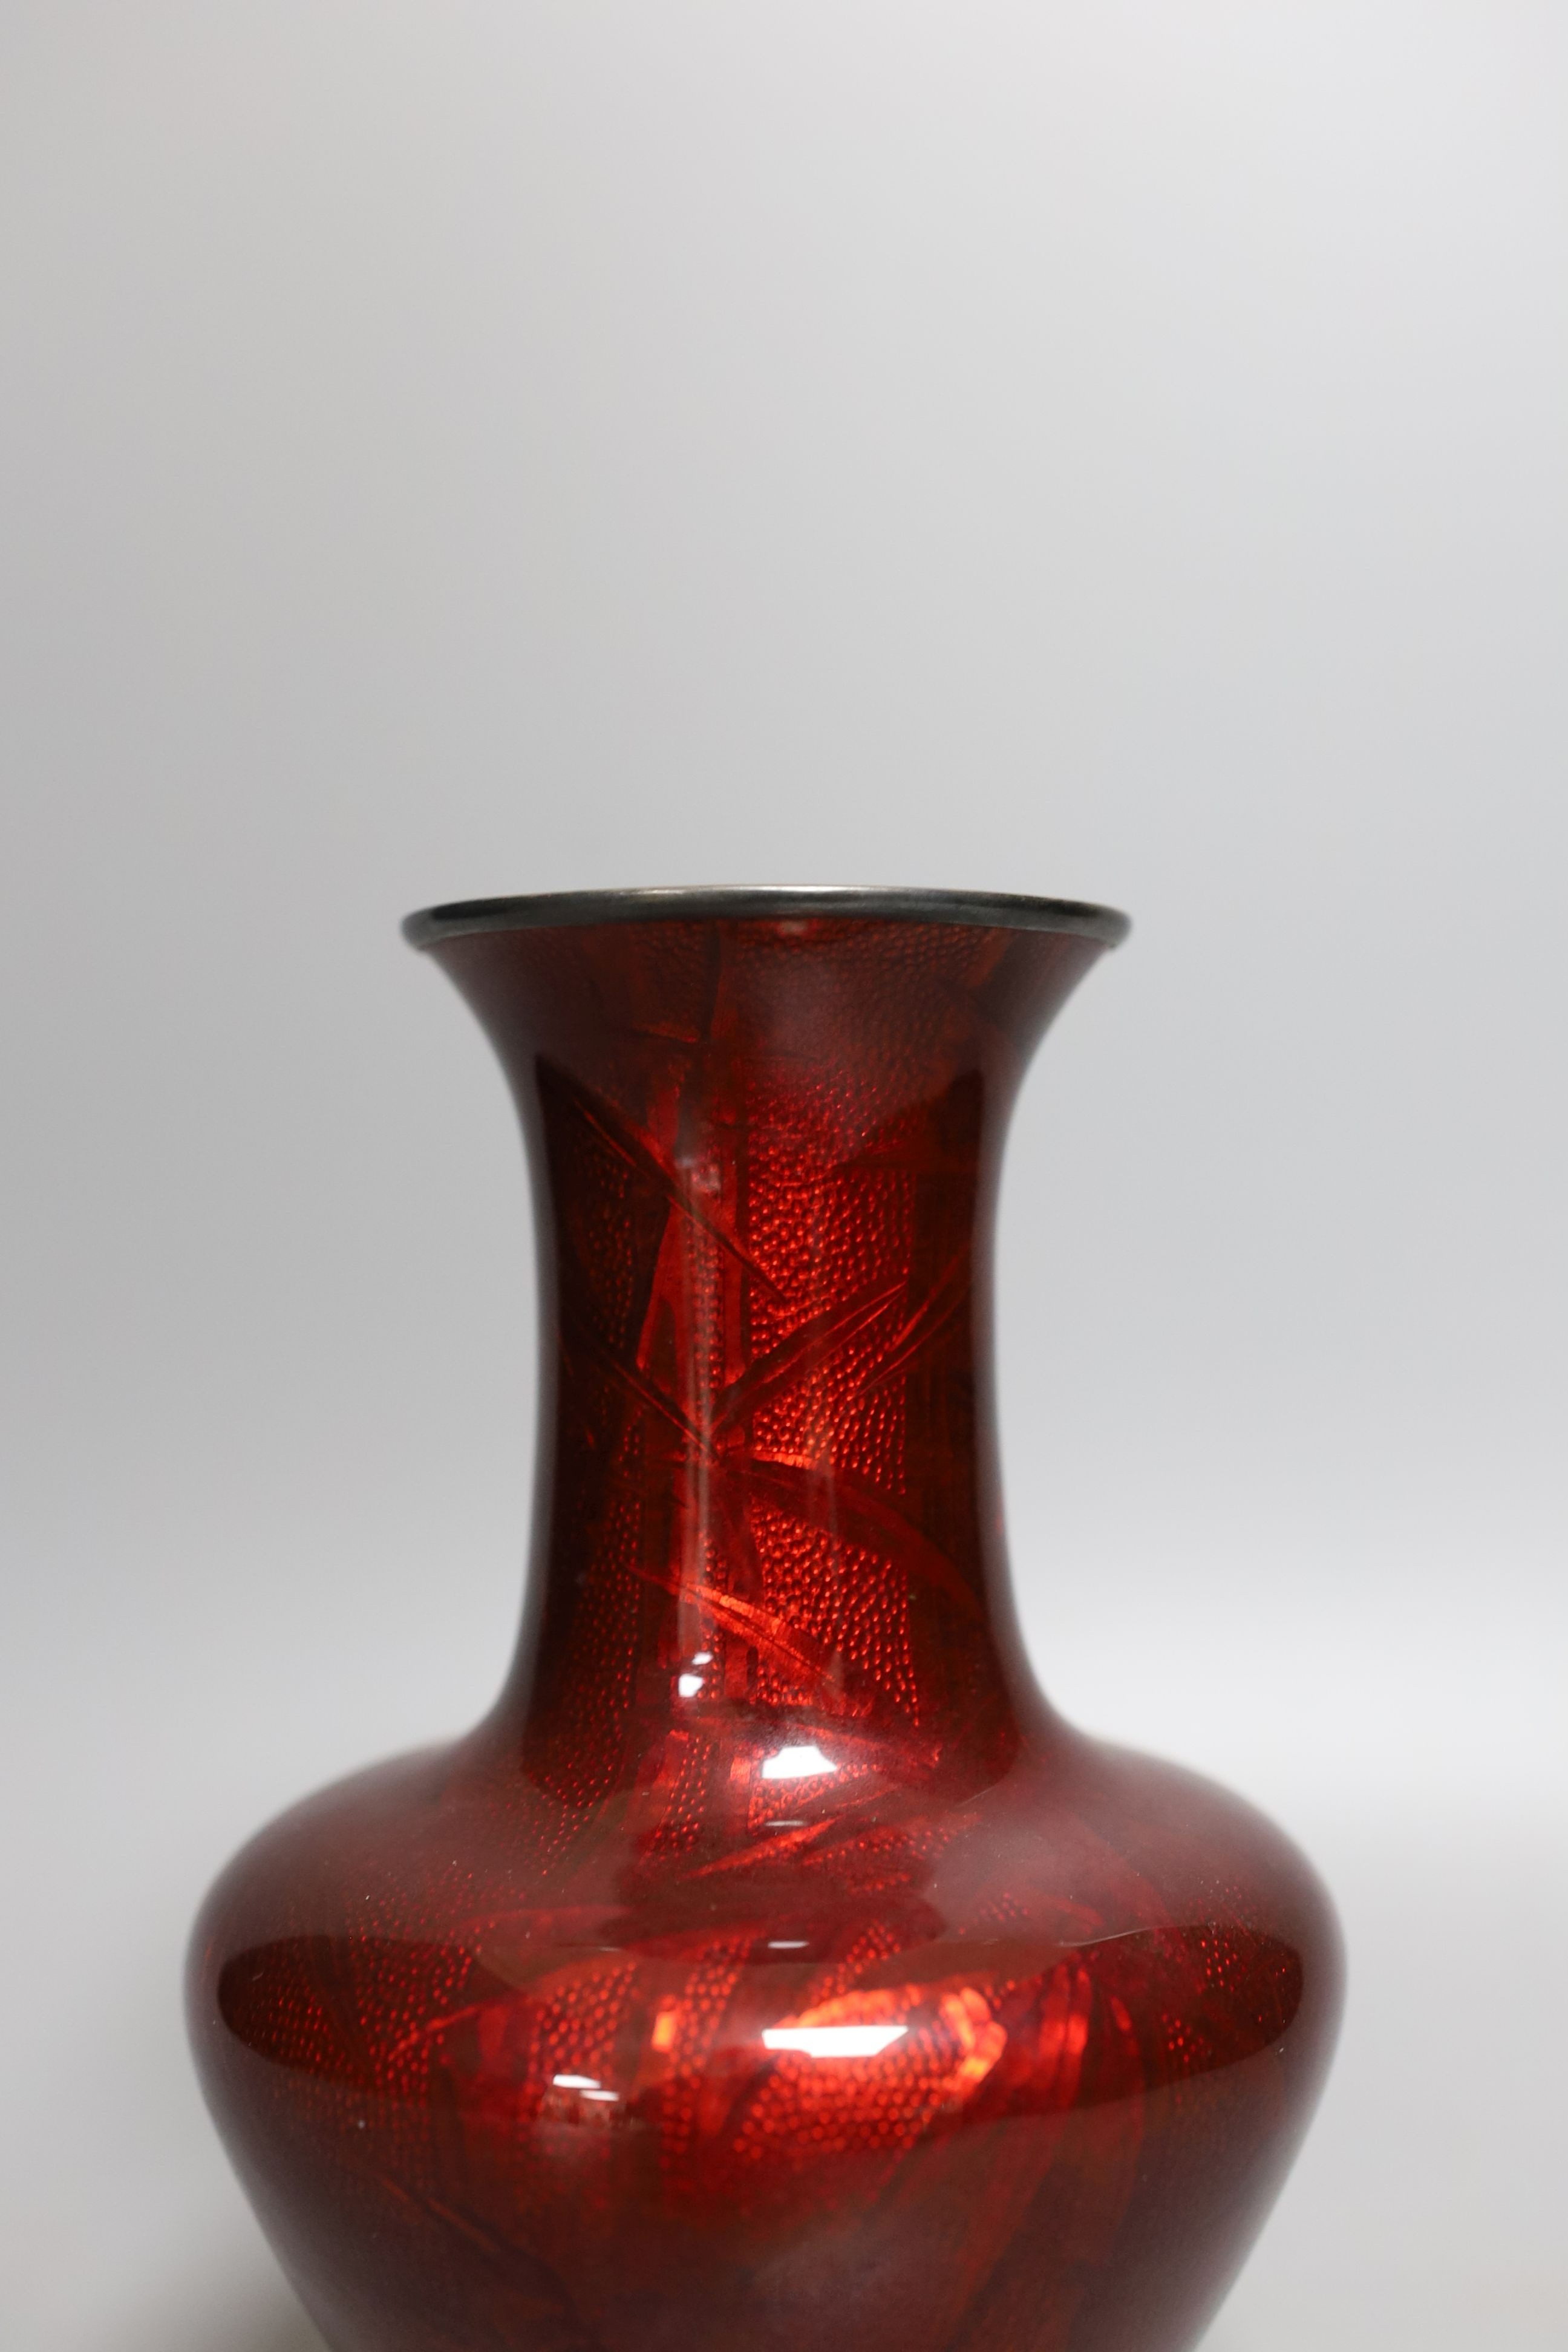 A Japanese red Ginbari enamel vase, by Ando, Taisho period, marked to base - 19cm tall, probably silver rimmed